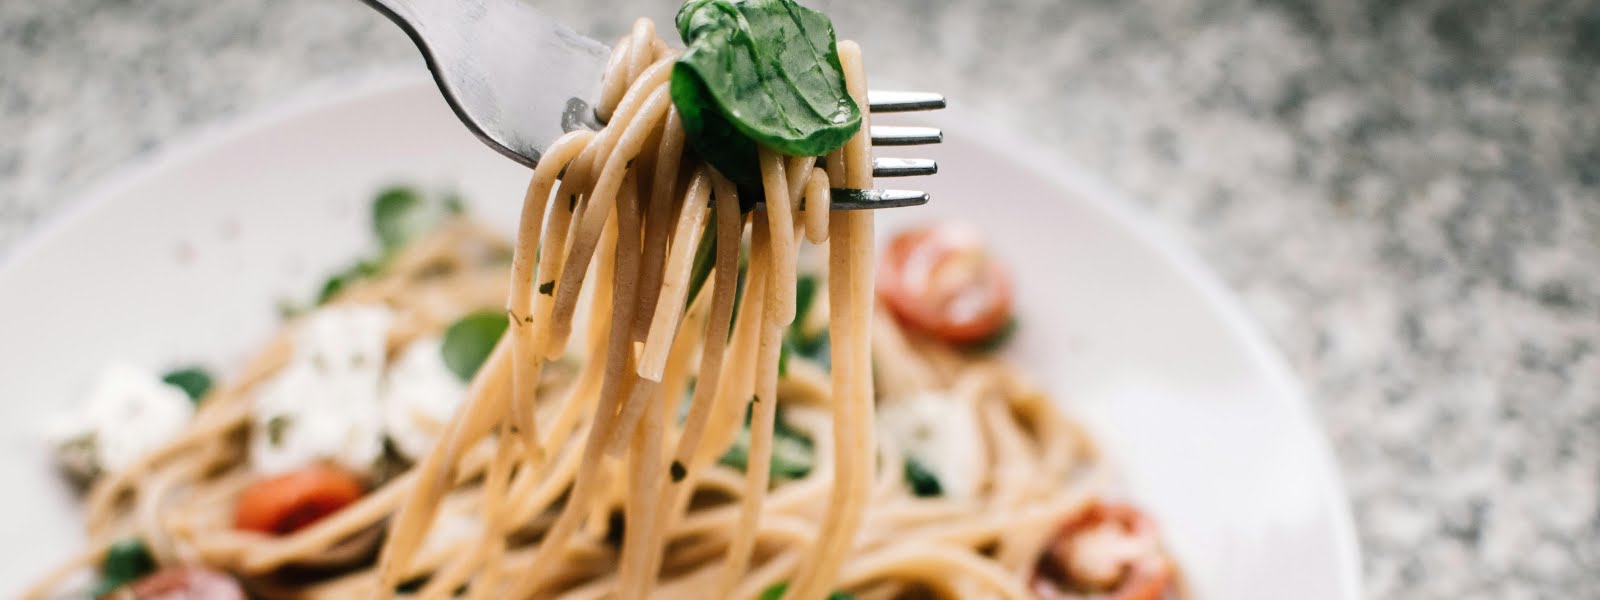 Supper Club: 3 pasta recipes to try this week